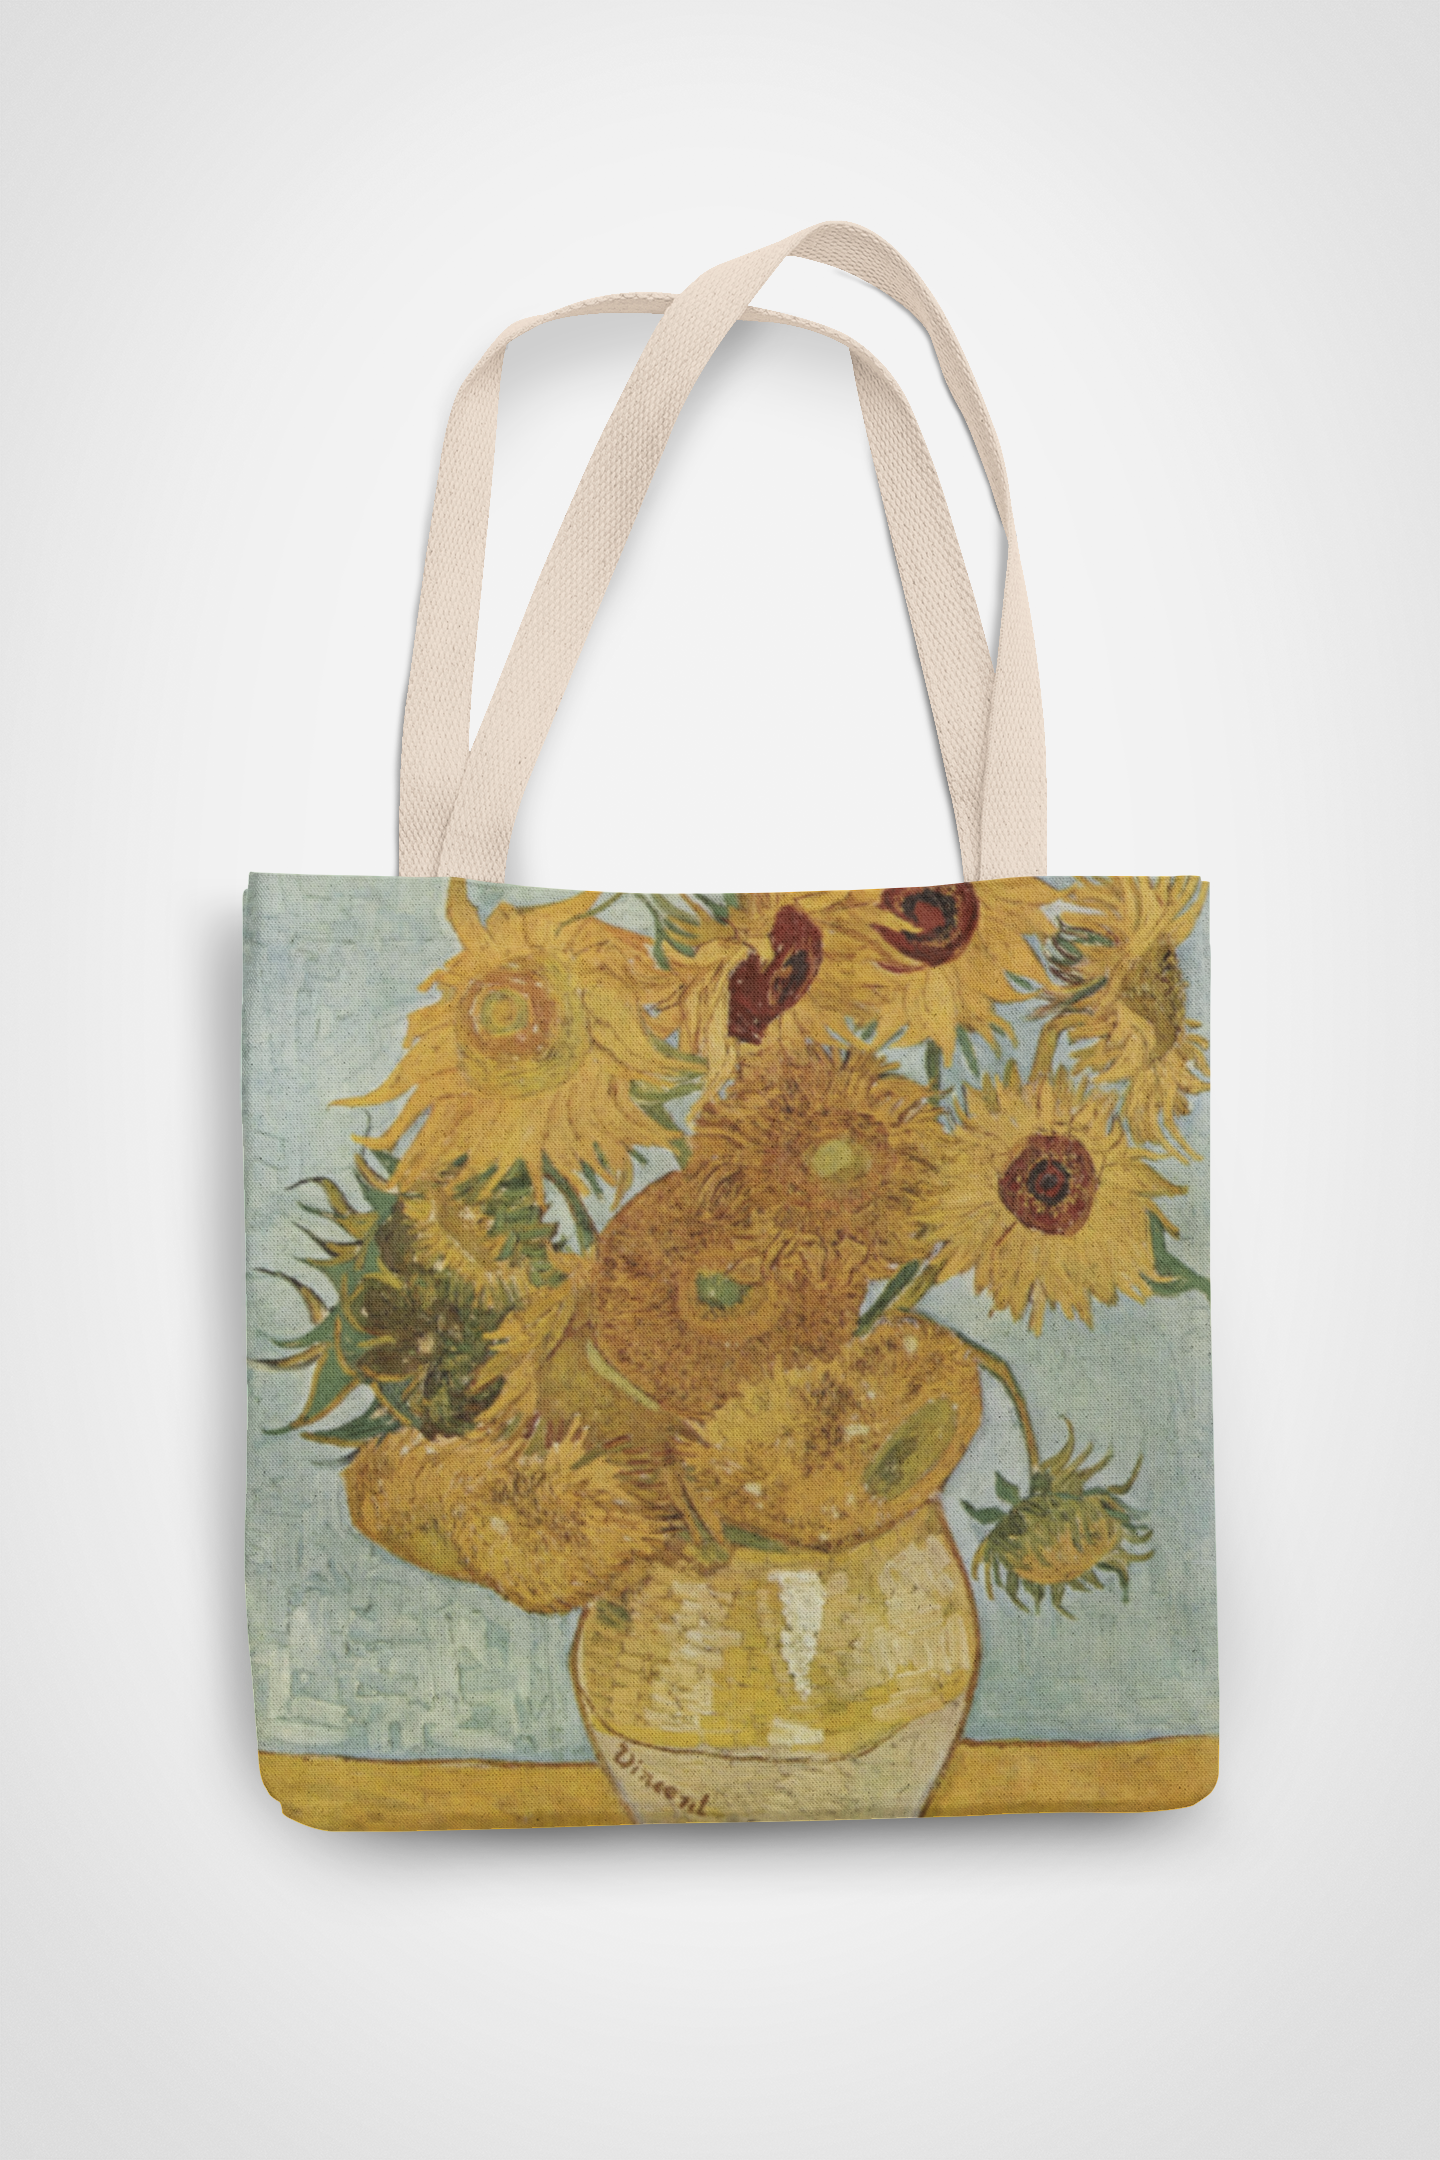 Van gogh Sunflowers - All over tote bag